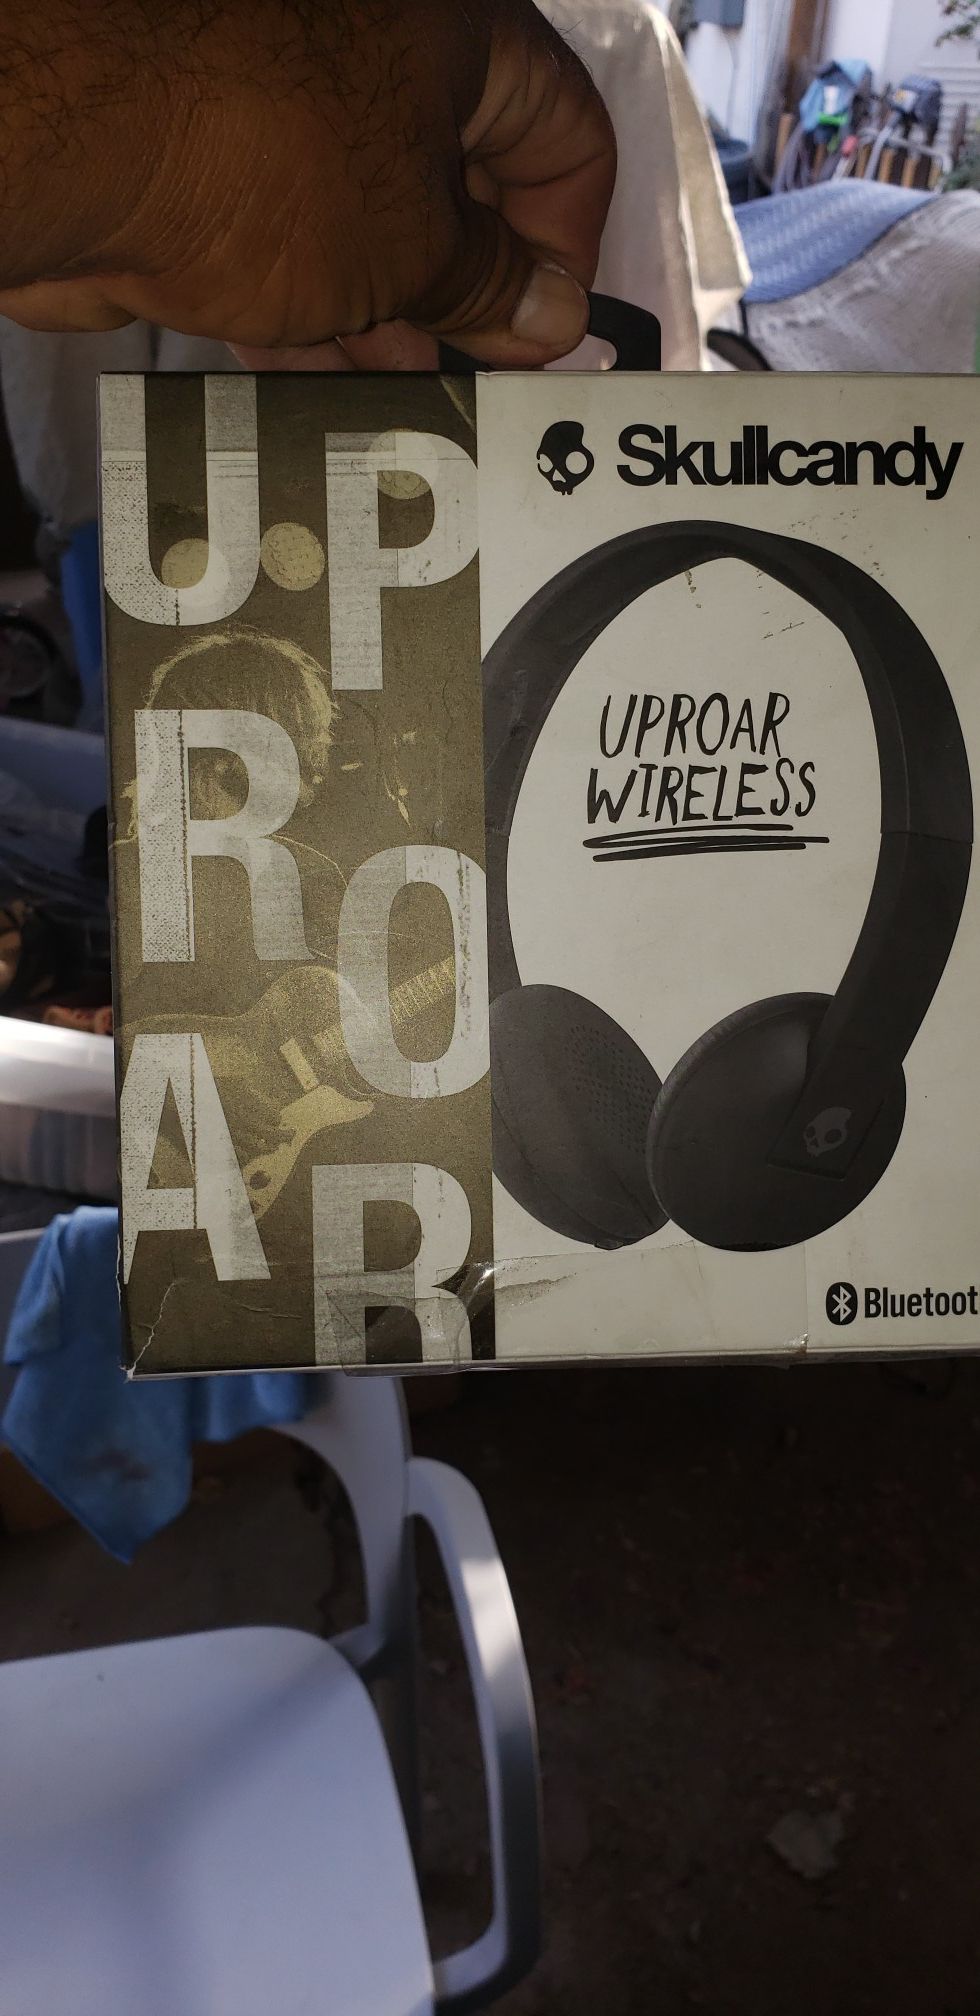 Skullcandy uproar wireless bluetooth in excellent condition like new never used